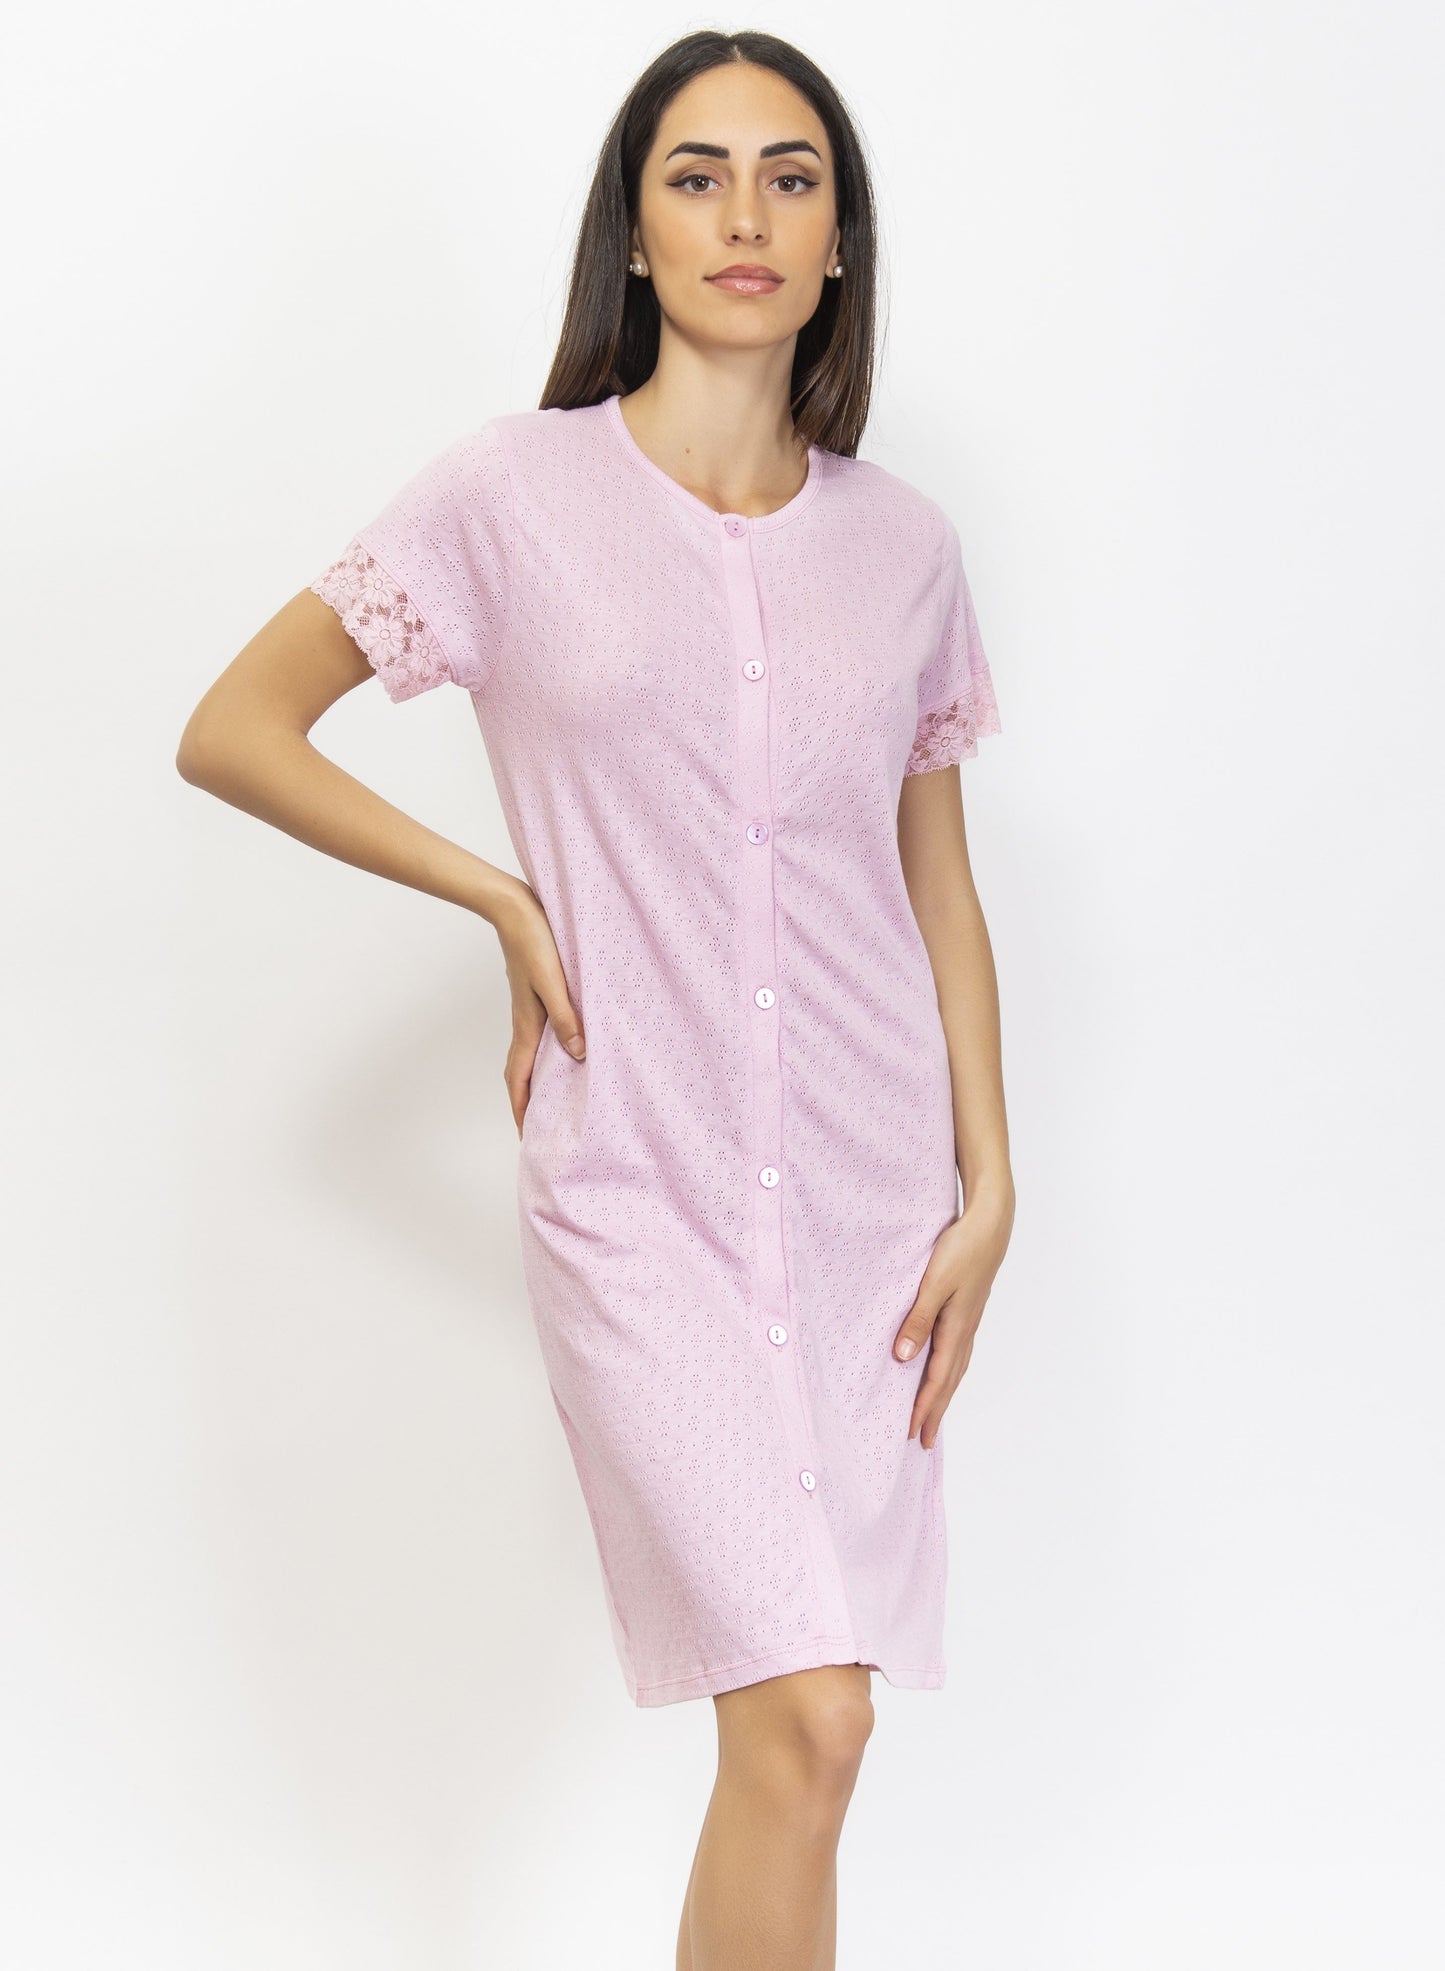 This housecoat is crafted from fine pointelle cotton for a smooth touch and subtle texture.